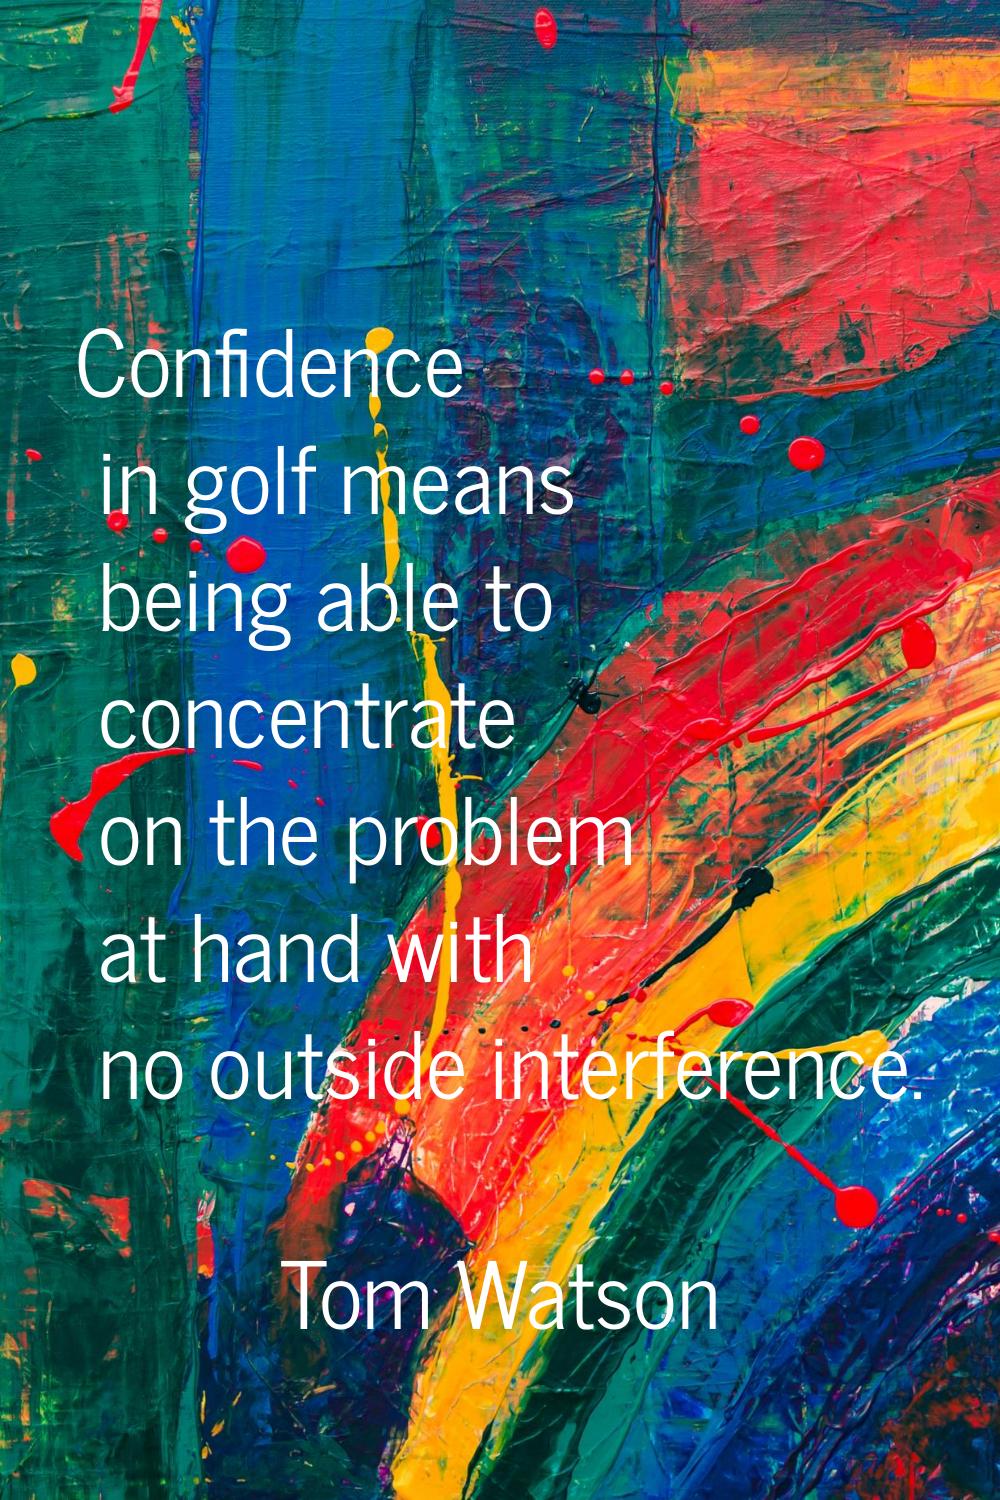 Confidence in golf means being able to concentrate on the problem at hand with no outside interfere